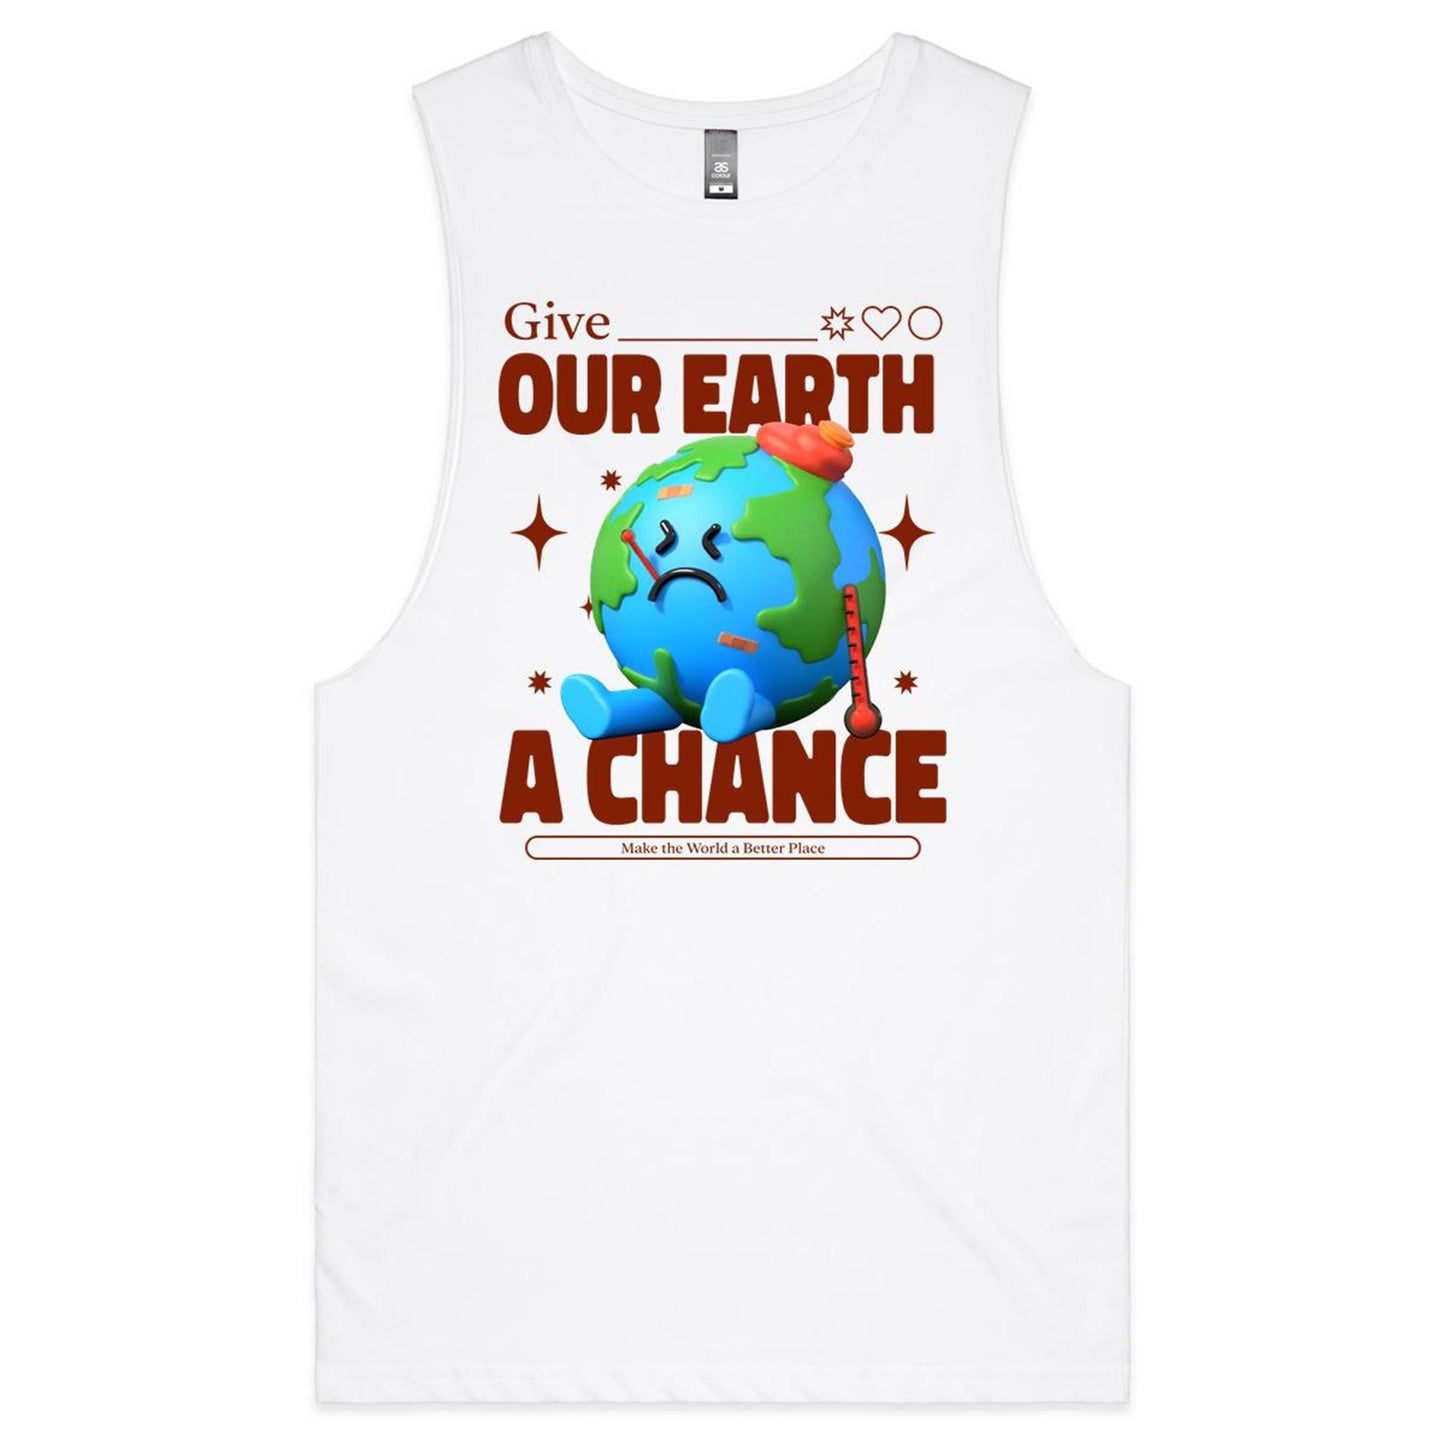 Give Our Earth A Chance - Mens Tank Top Tee White Mens Tank Tee Environment